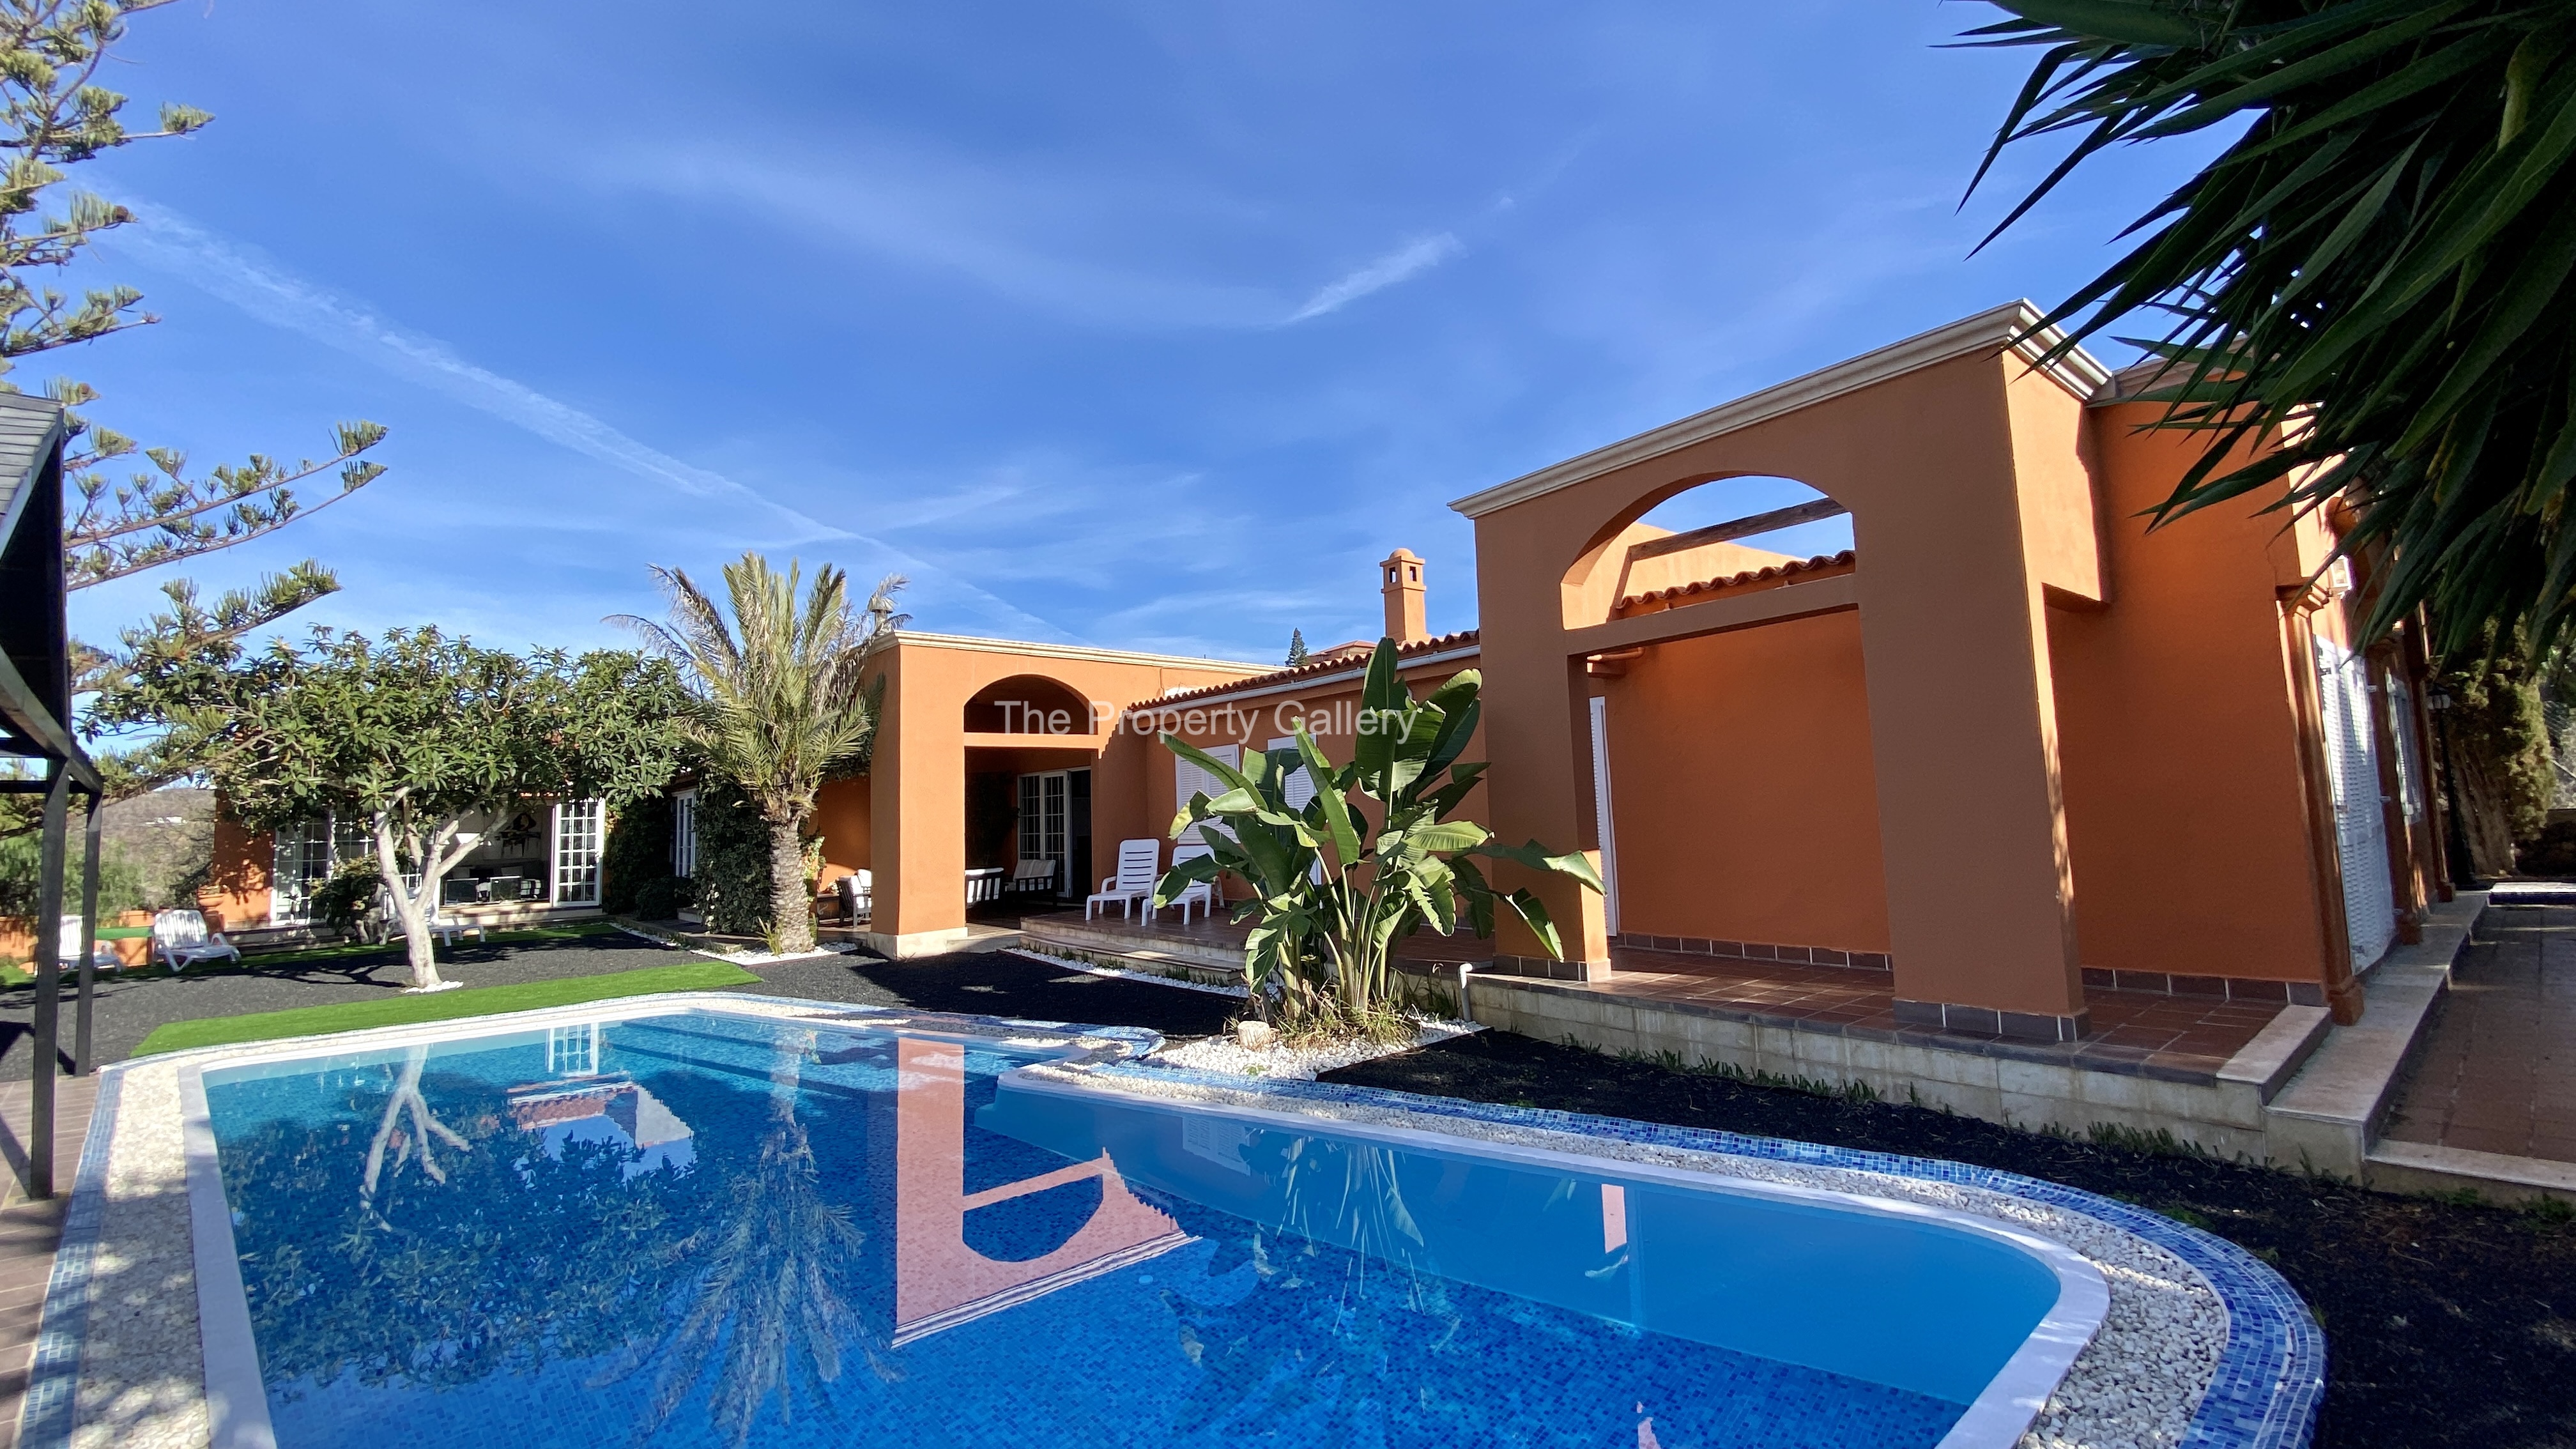 Villa in Taucho marketed by The Property Gallery